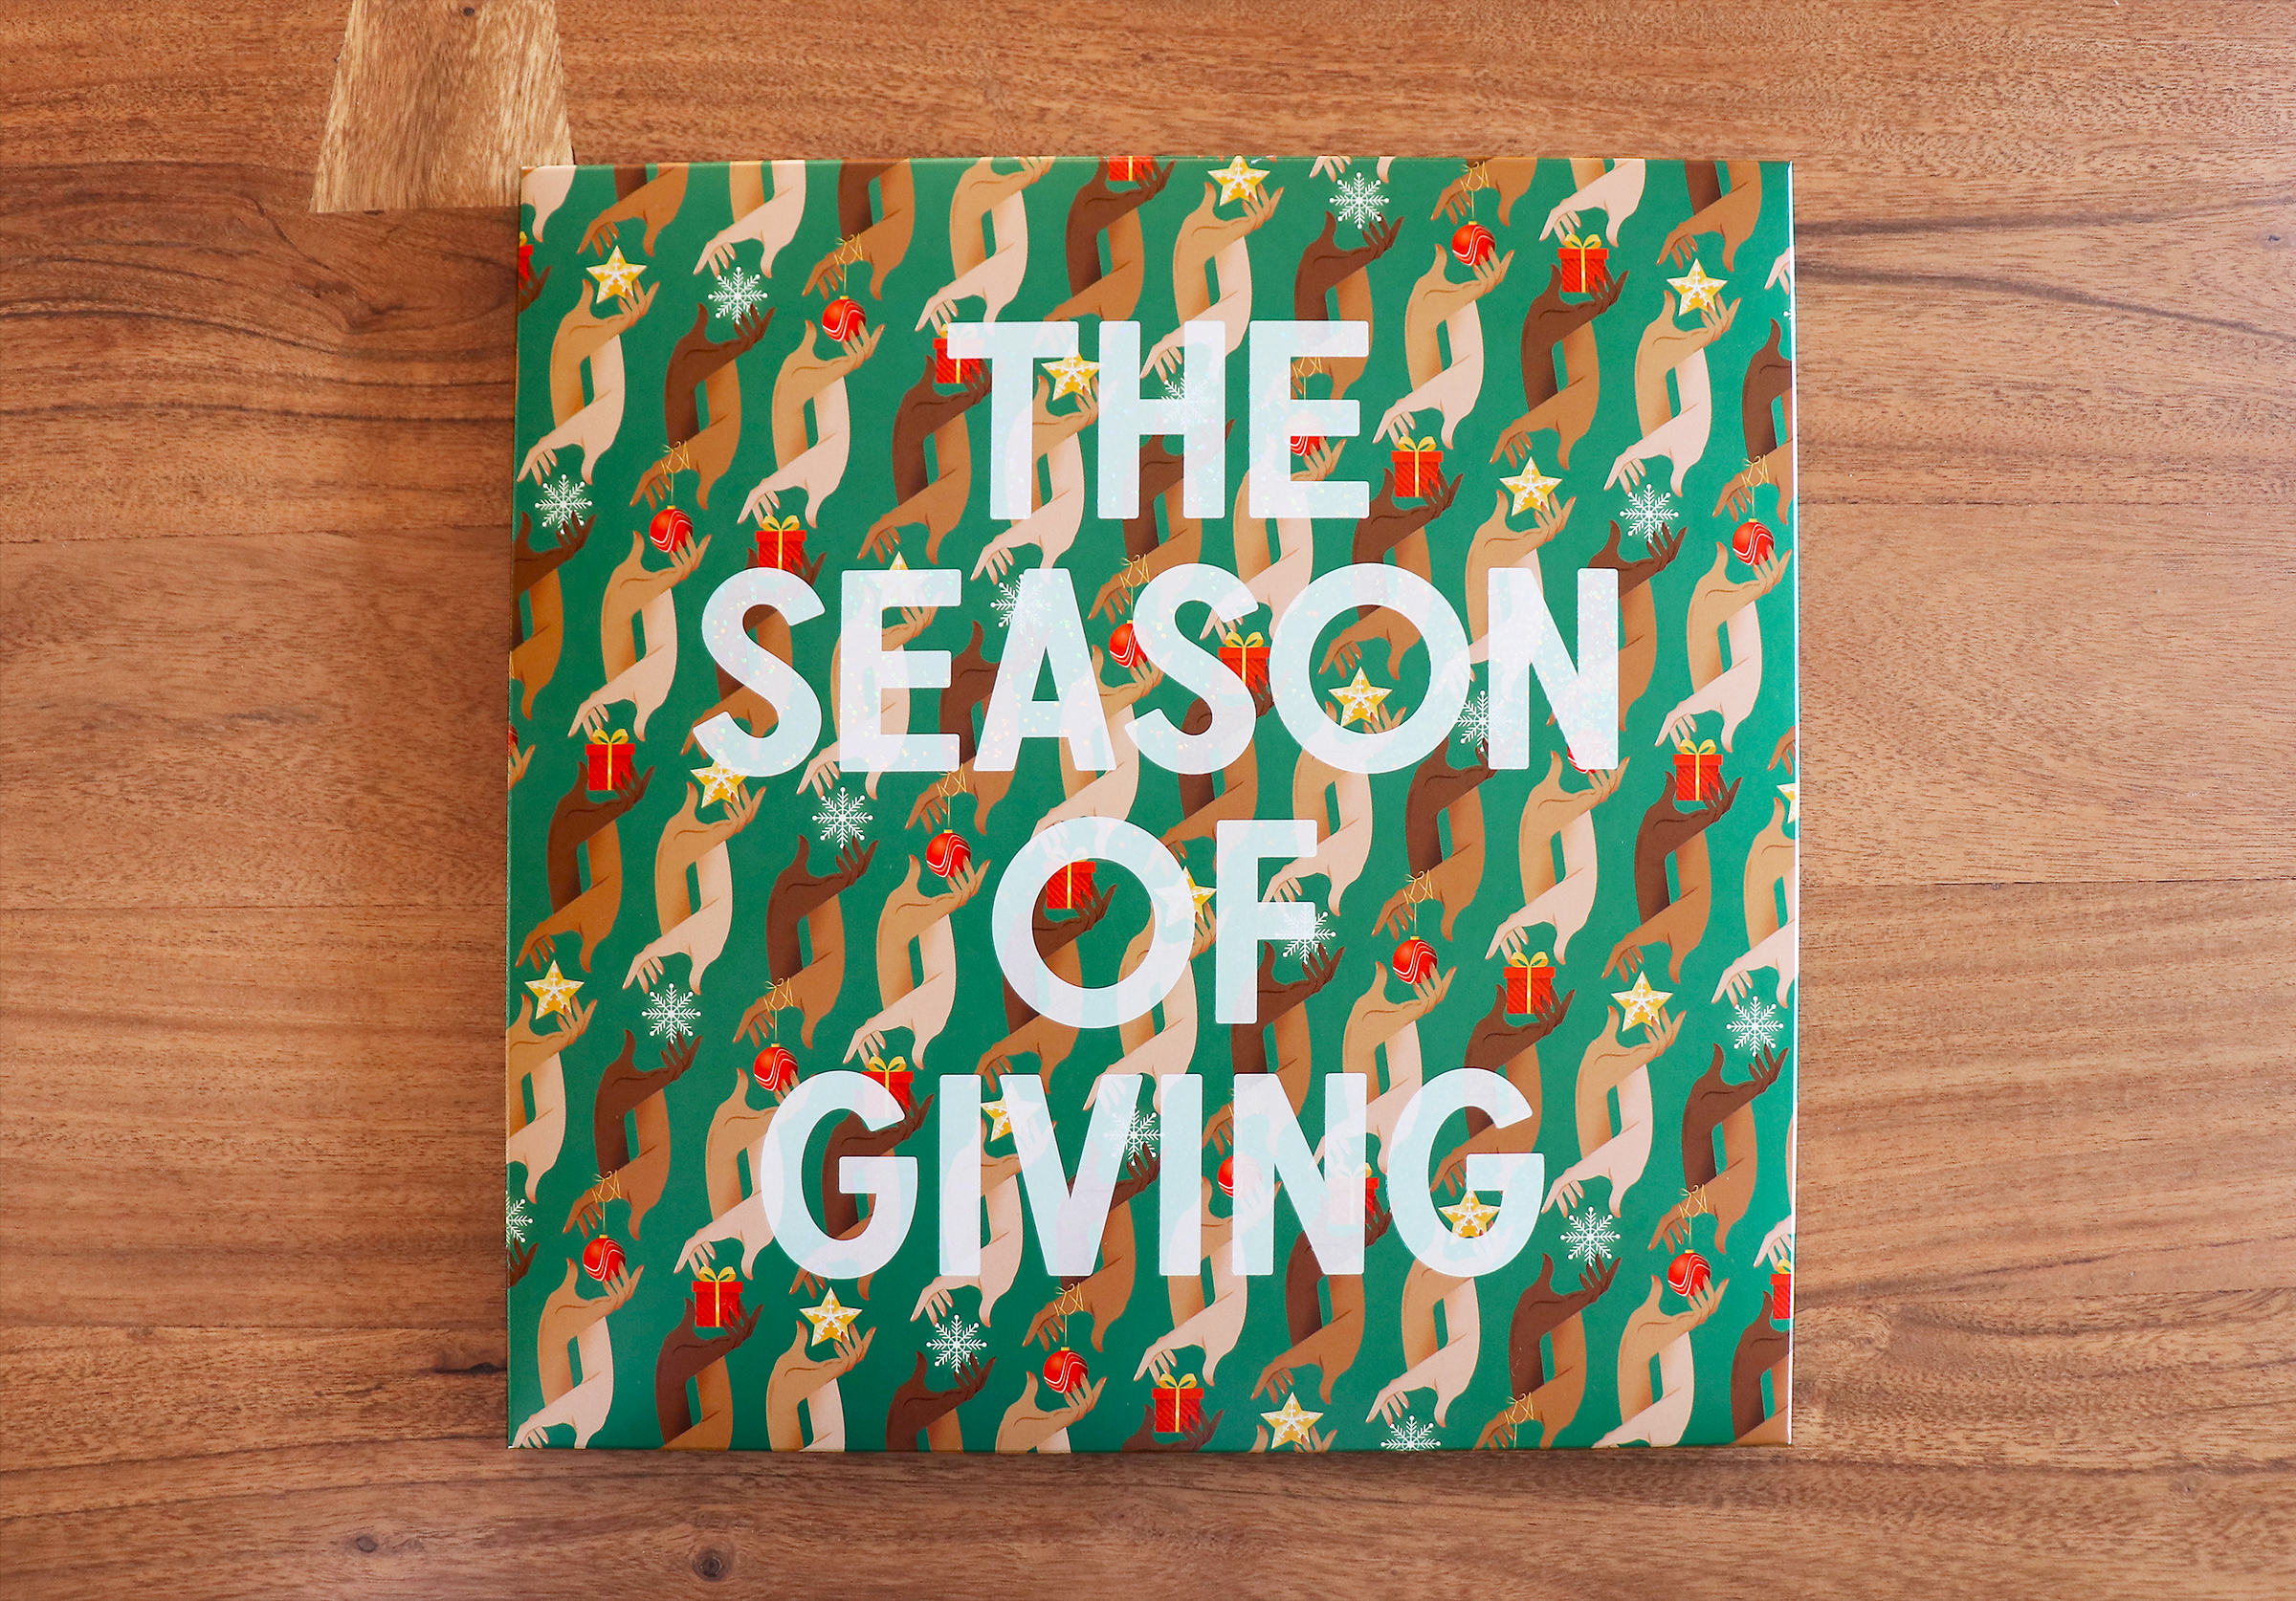 Front cover artwork of the Season of Giving Holiday Wrap set